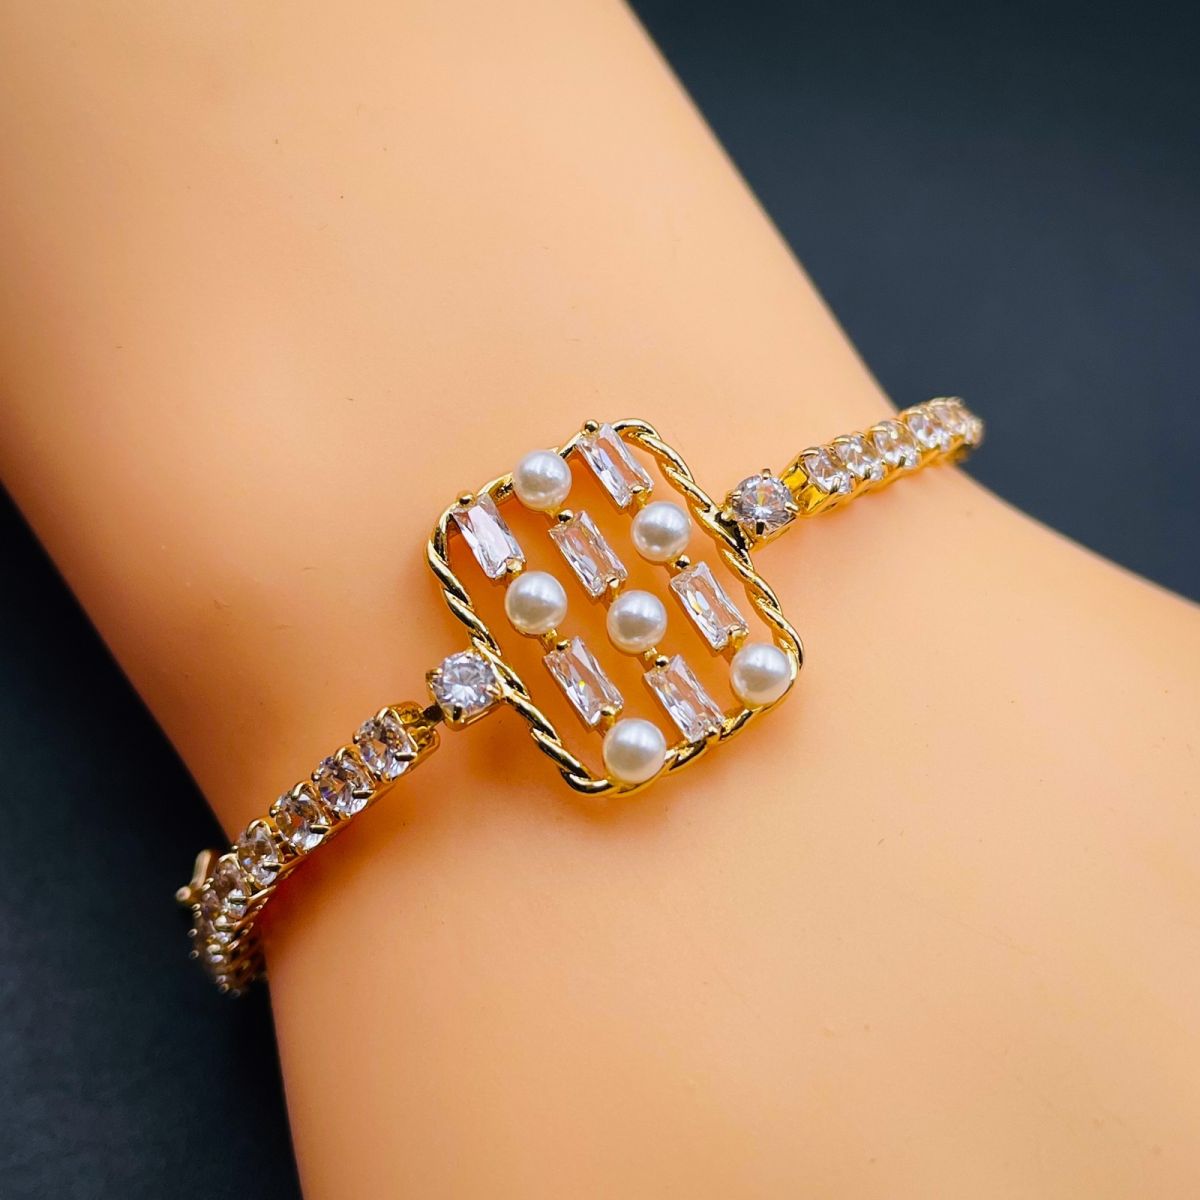 Tipsyfly Rectangle Solitaire Tennis Bracelet Buy Tipsyfly Rectangle  Solitaire Tennis Bracelet Online at Best Price in India  Nykaa